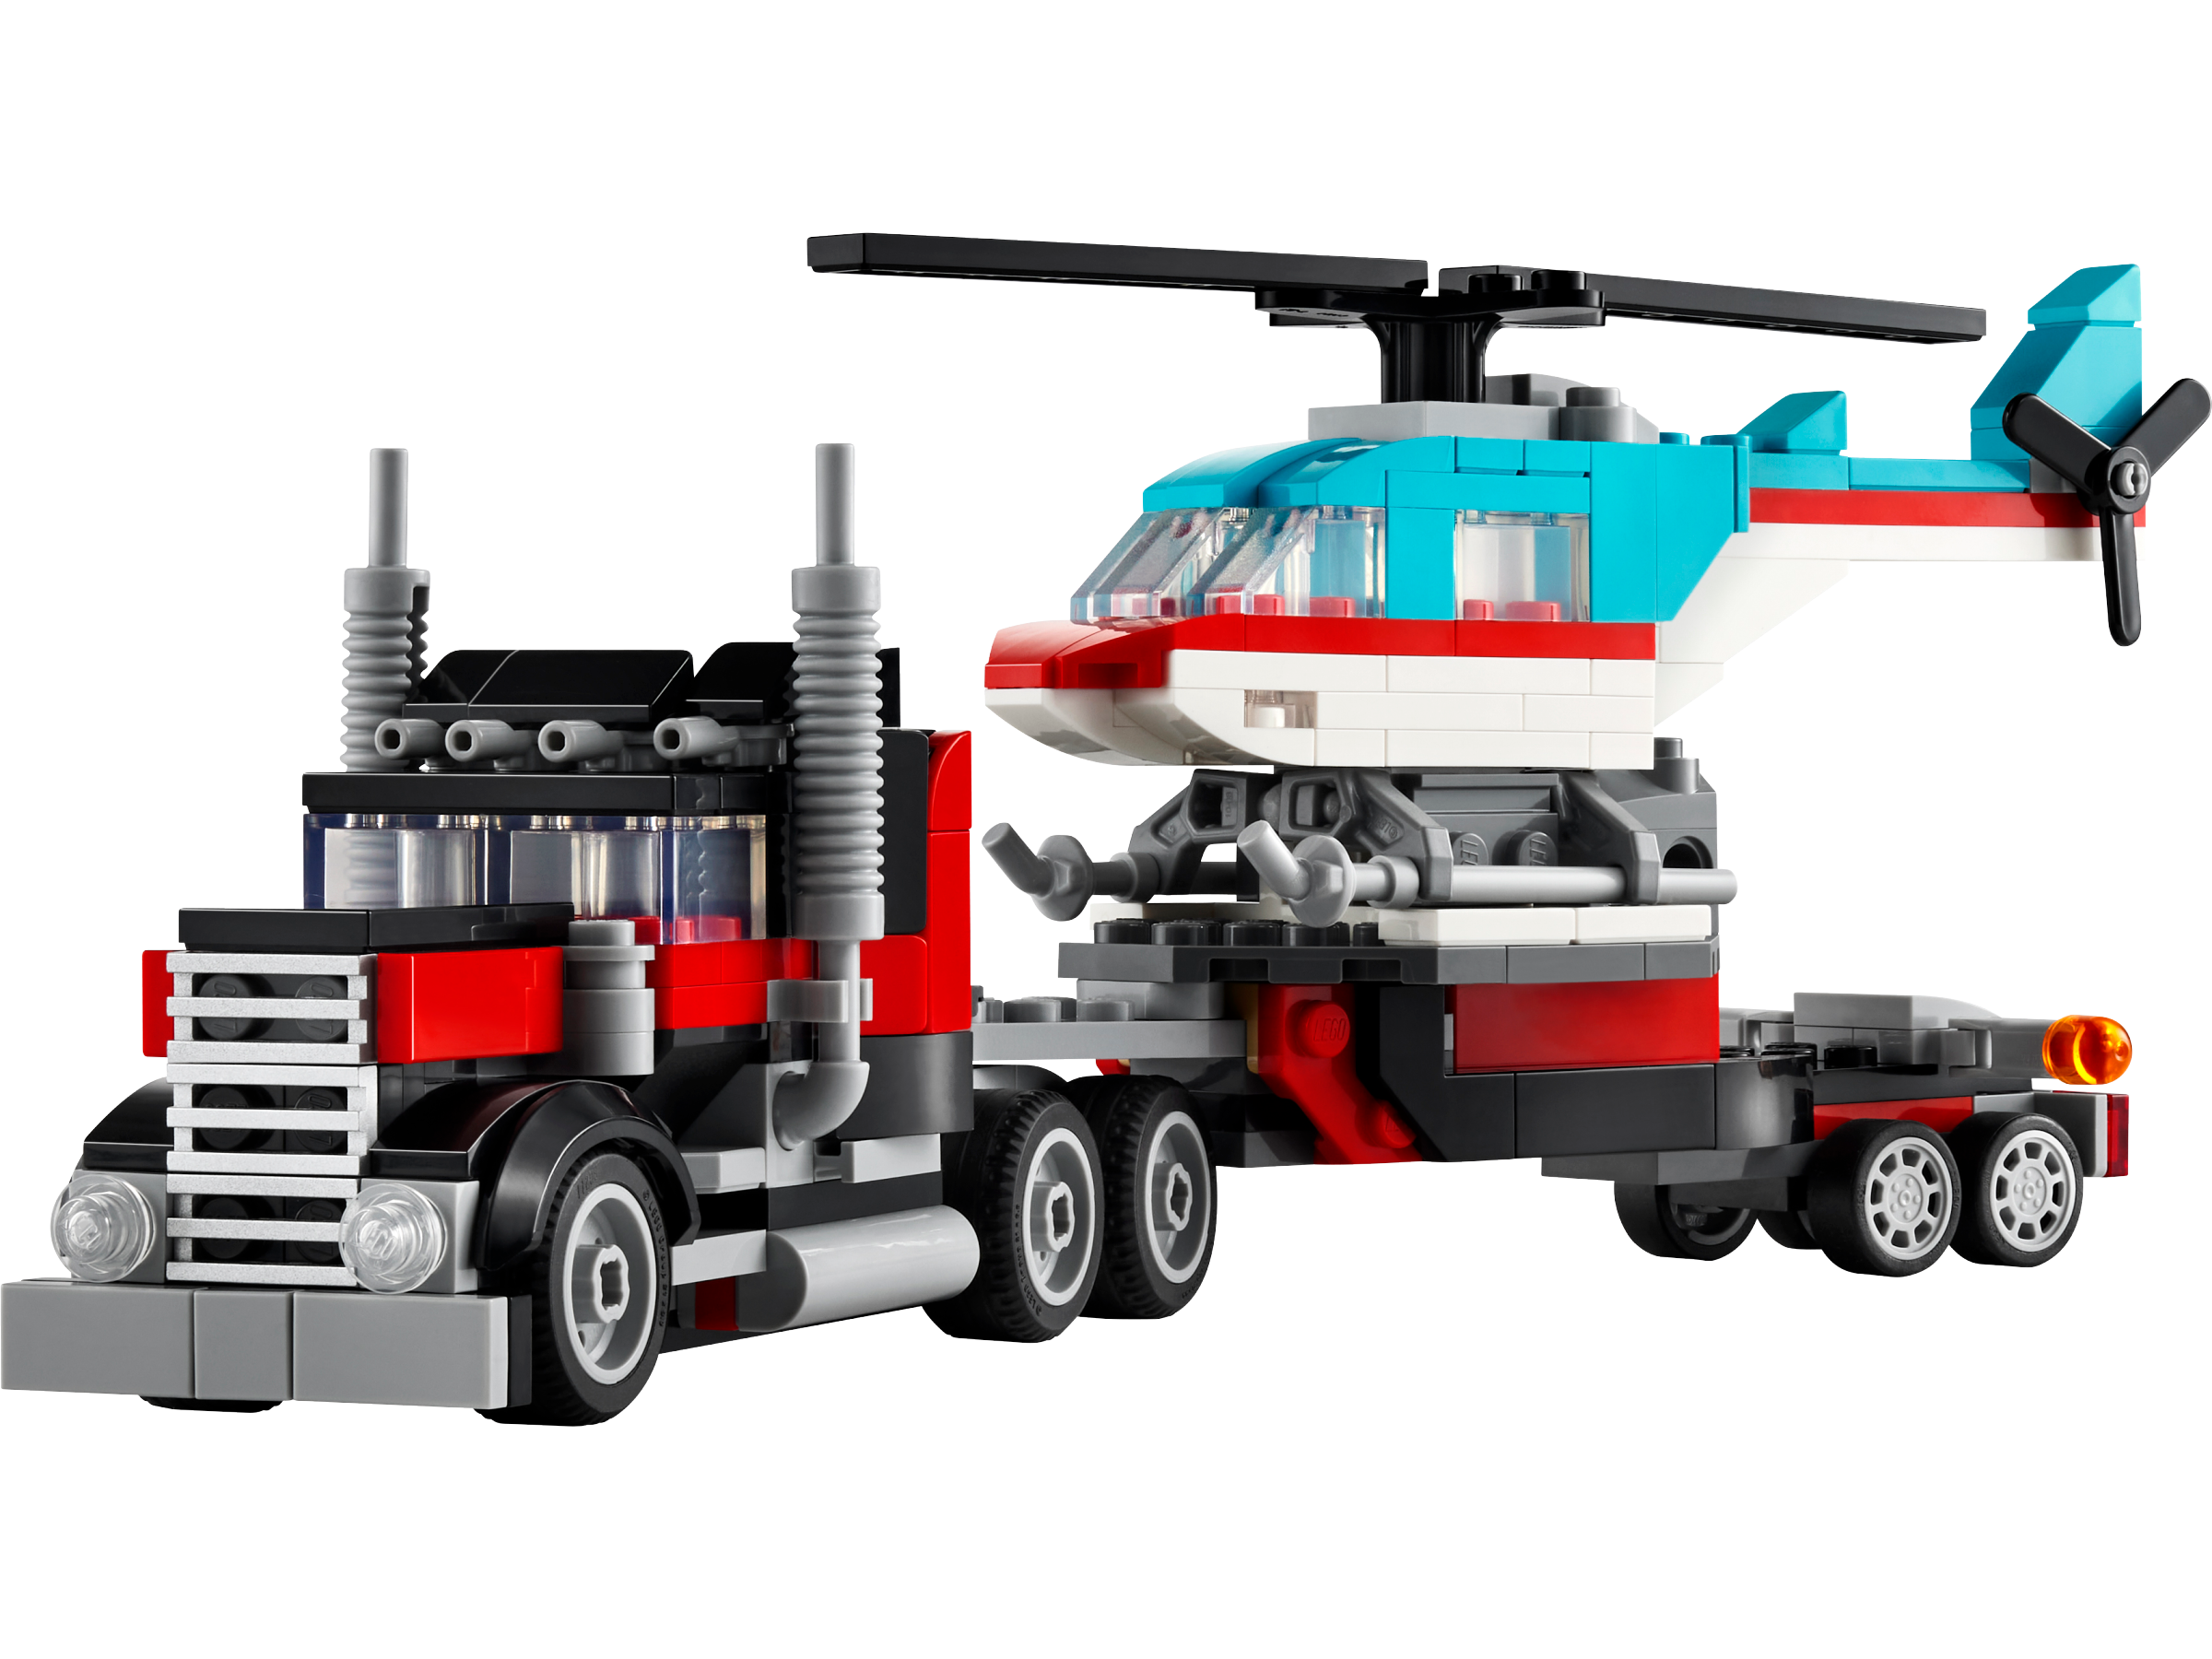 LEGO 31146 Creator 3in1 Flatbed Truck with Helicopter Toy at Toys